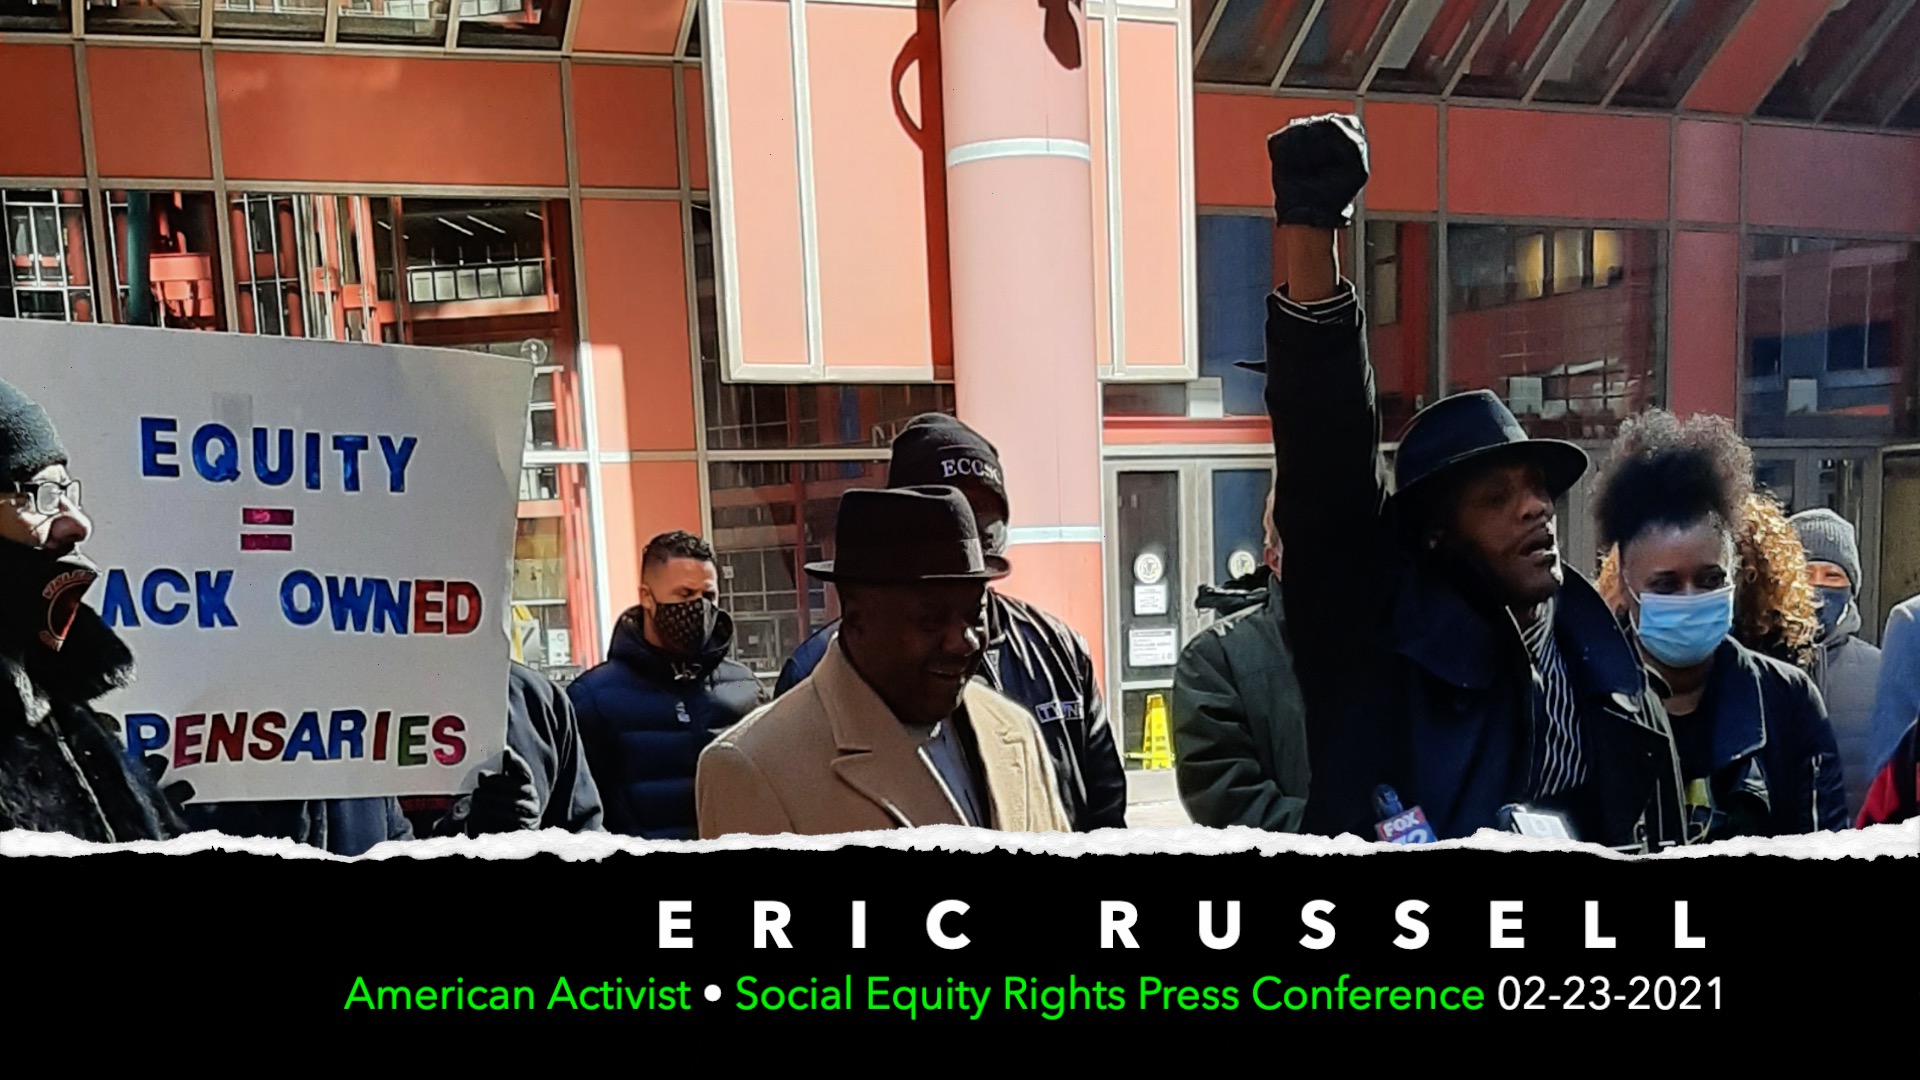 Chicago Social Equity Rights Press Conference Eric Russell 02-23-2021